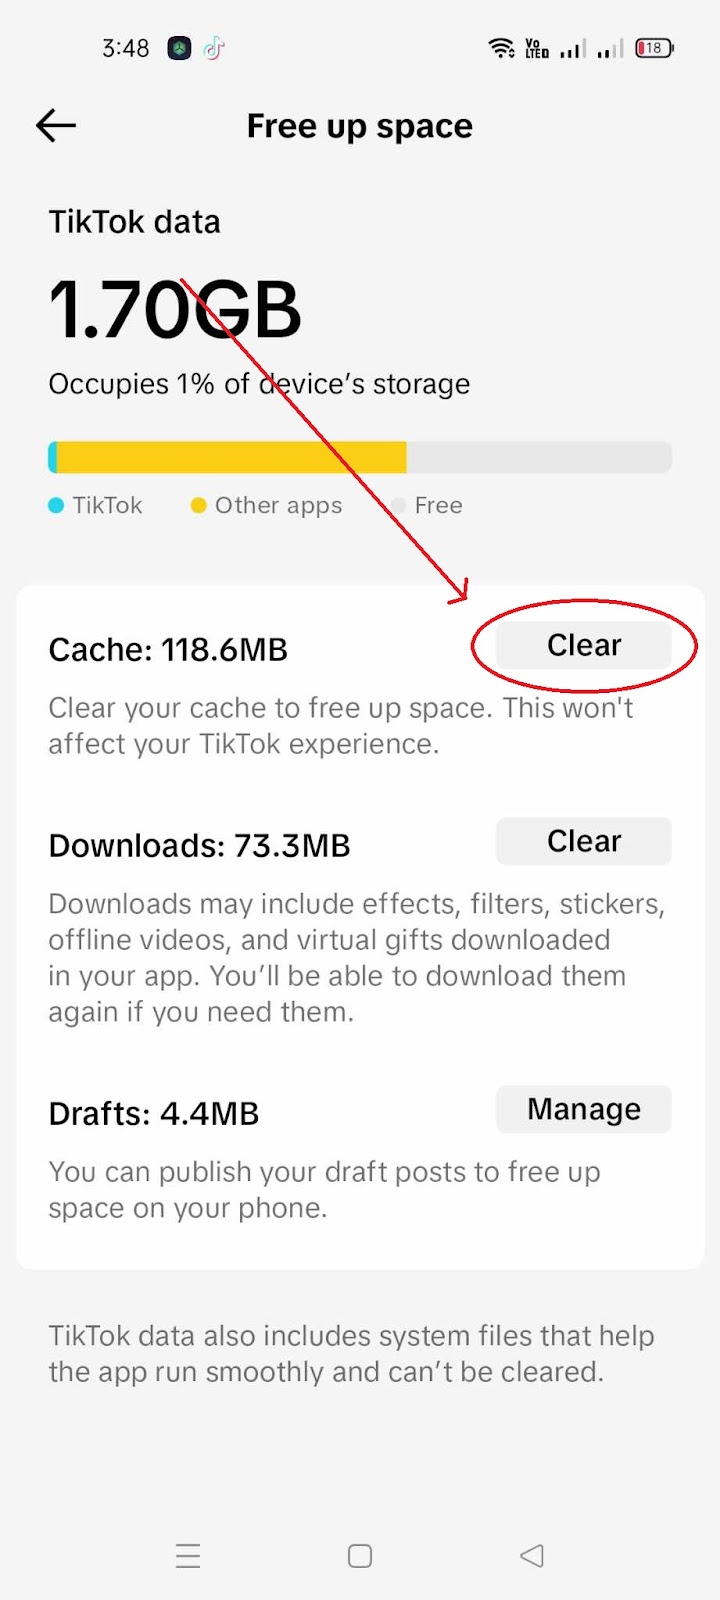 Why is TikTok showing me the same stuff - Clear Cache